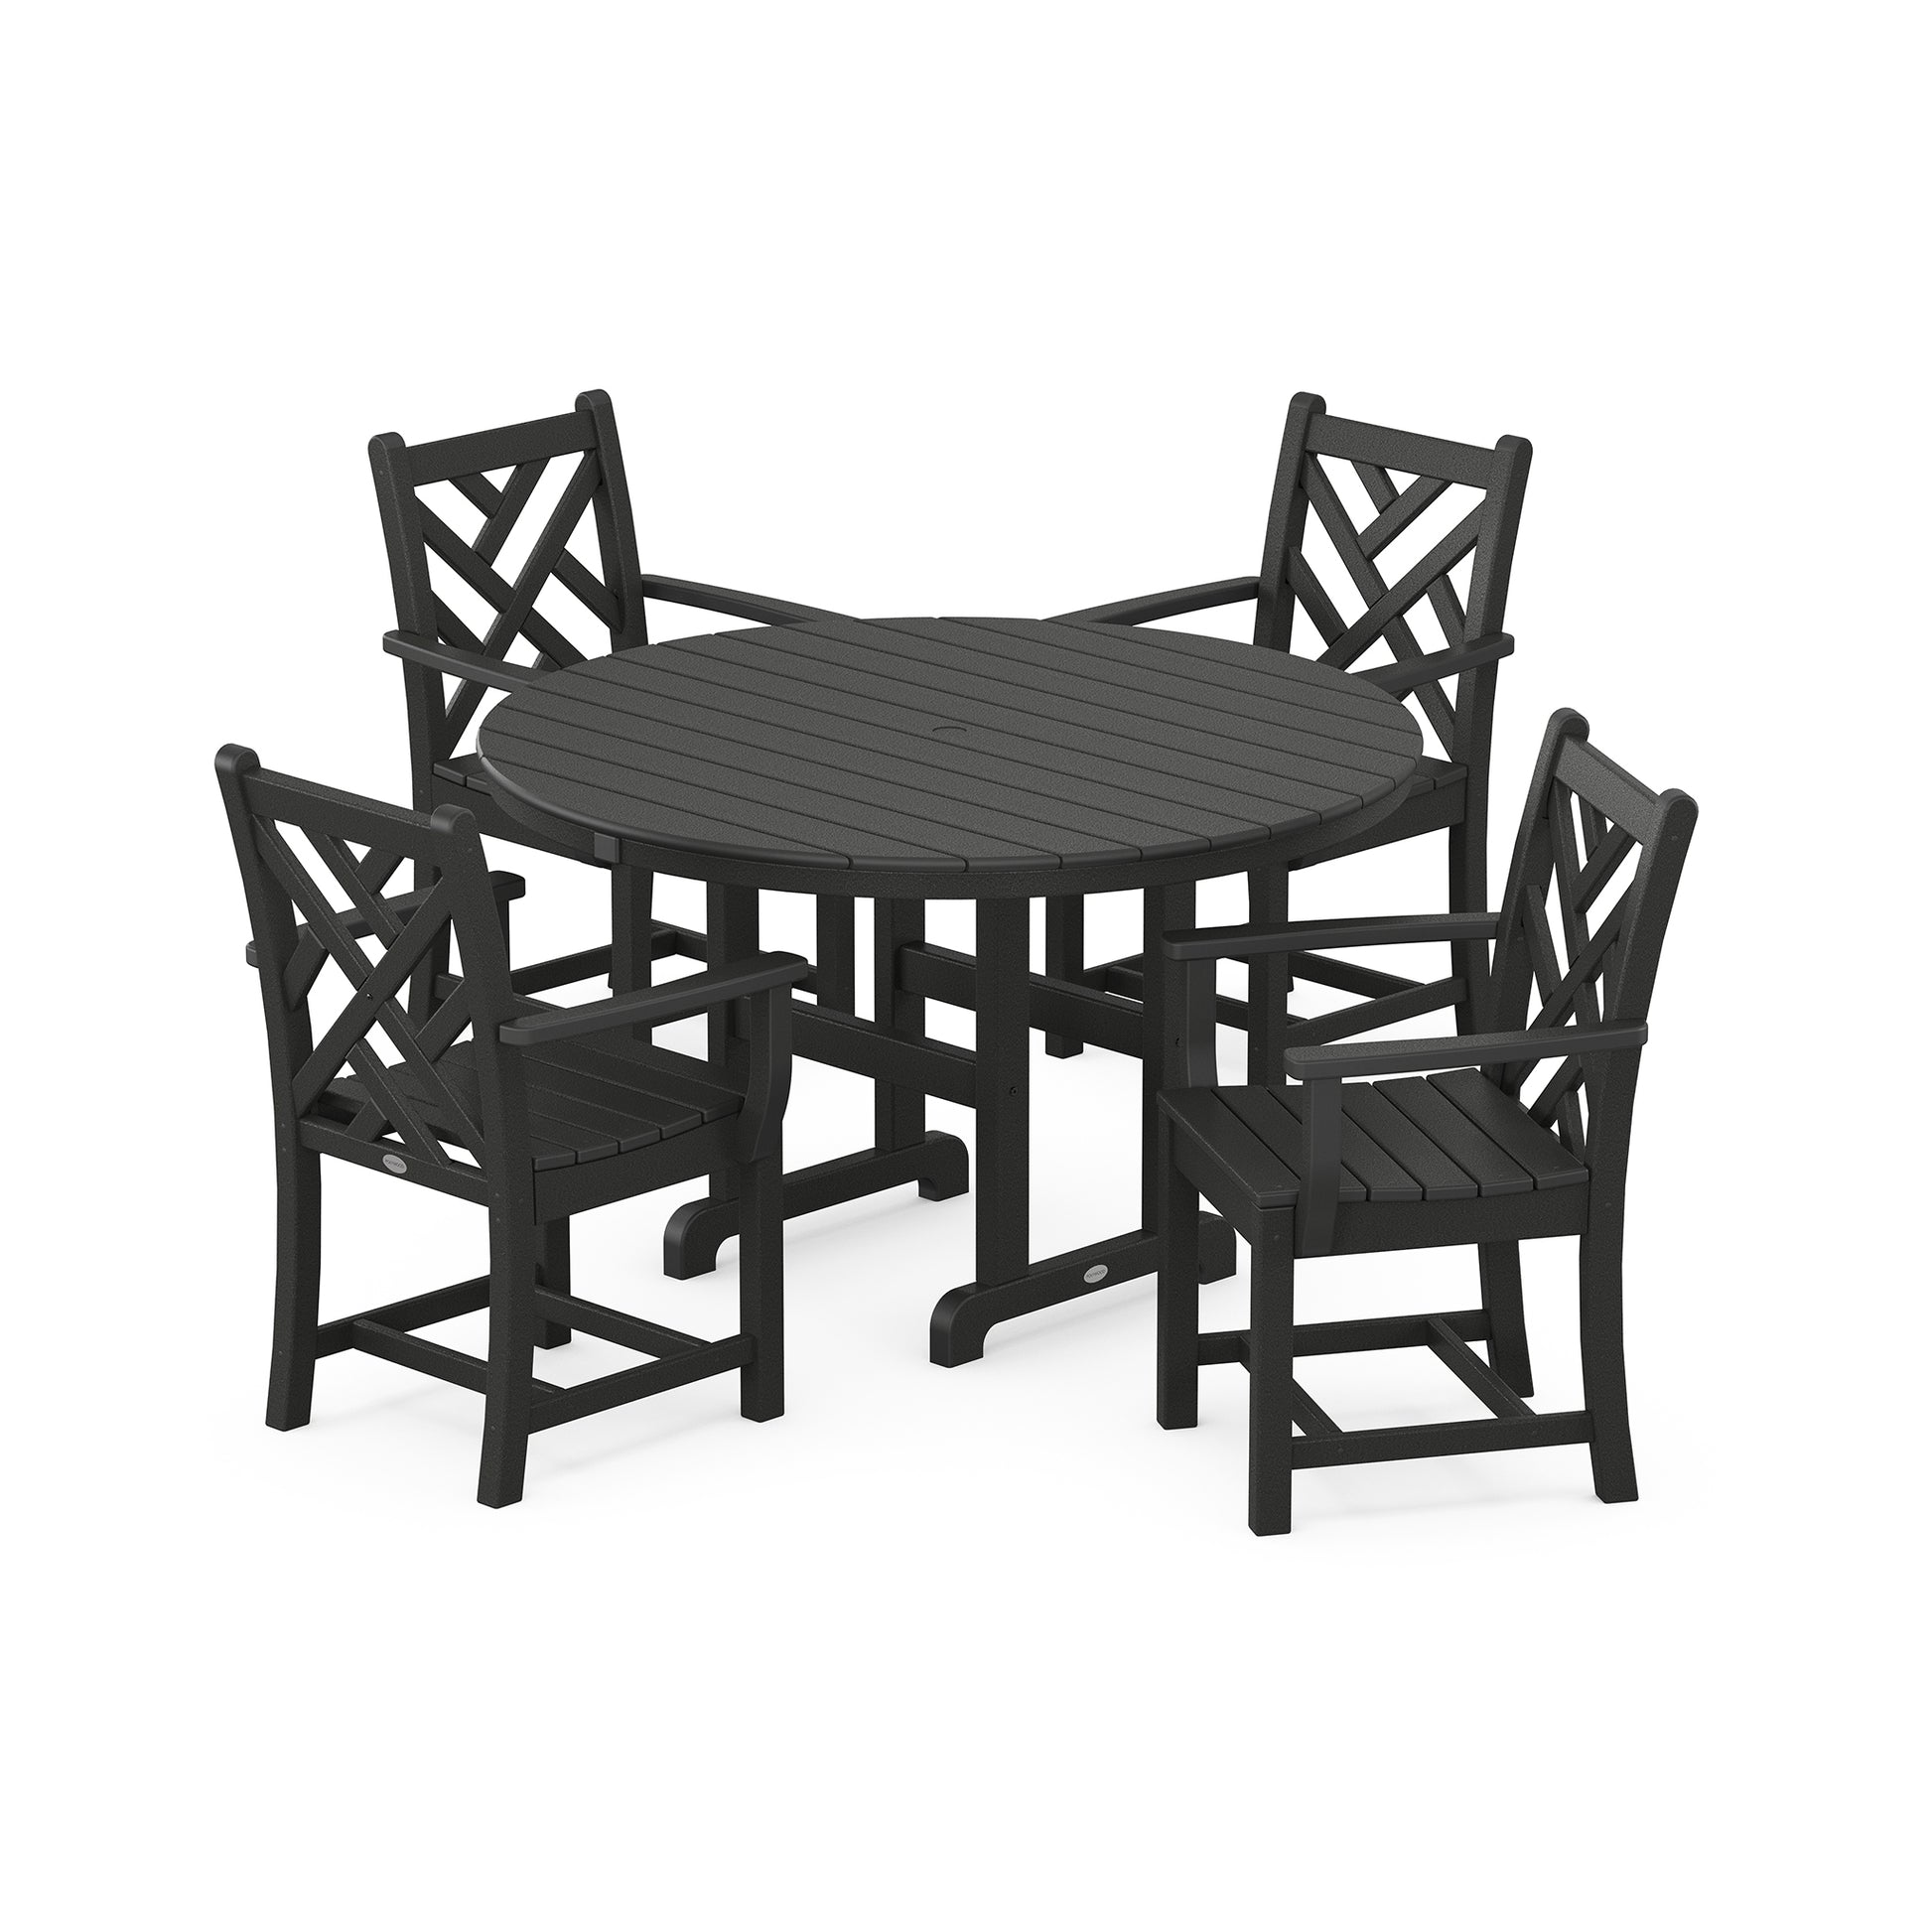 A black outdoor dining set consisting of a round table and four chairs with x-back designs, all crafted from POLYWOOD® recycled lumber, positioned on a plain white background.